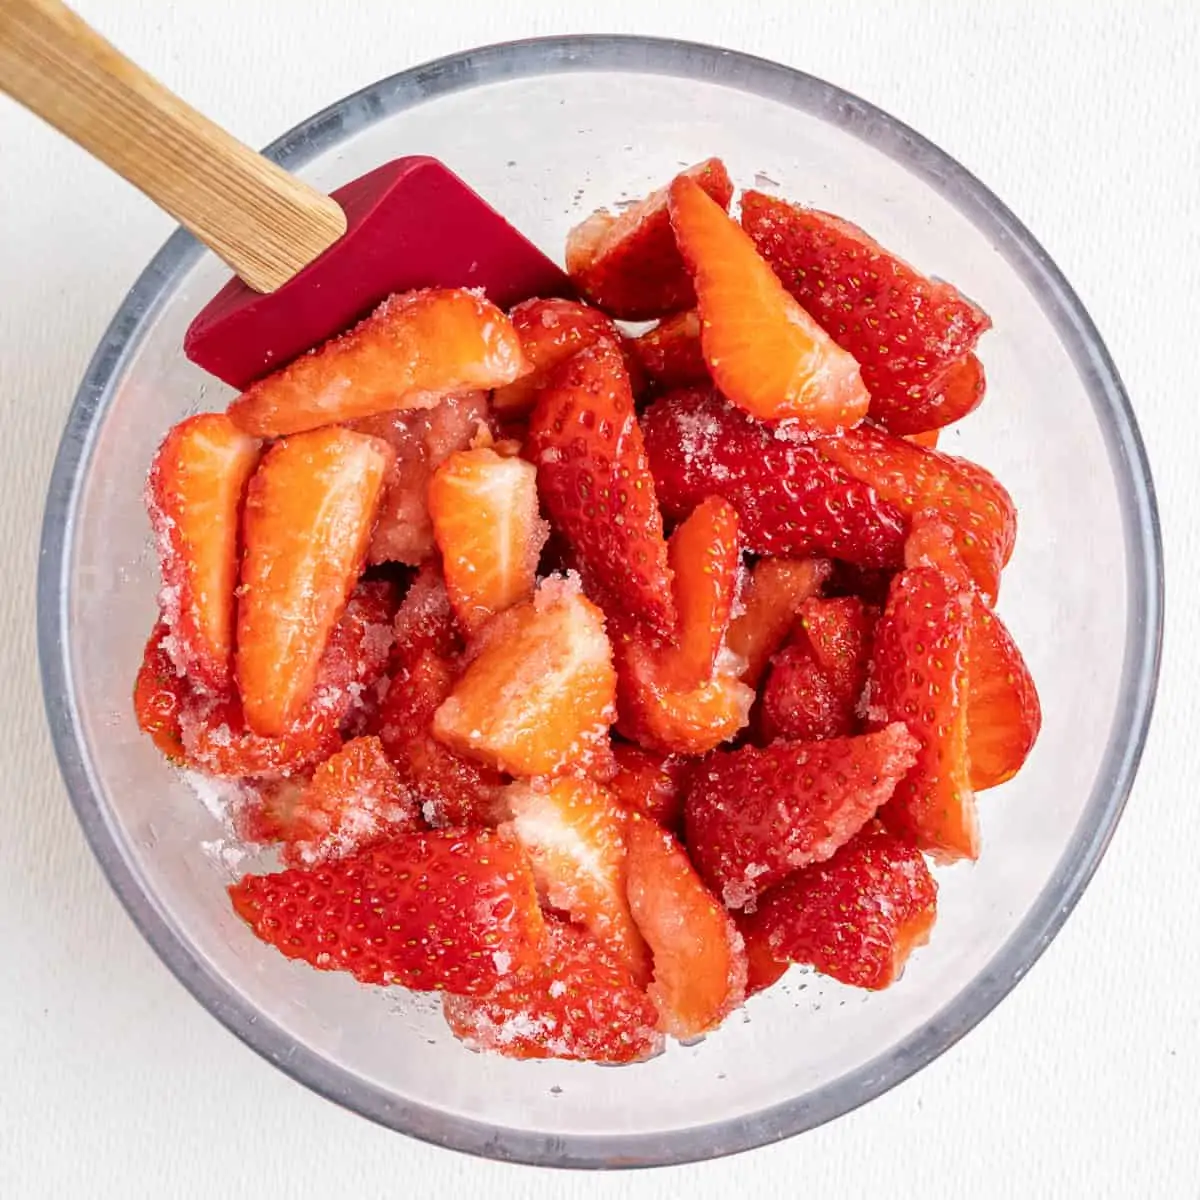 Quartered strawberries combined with granulated sugar in a glass bowl.